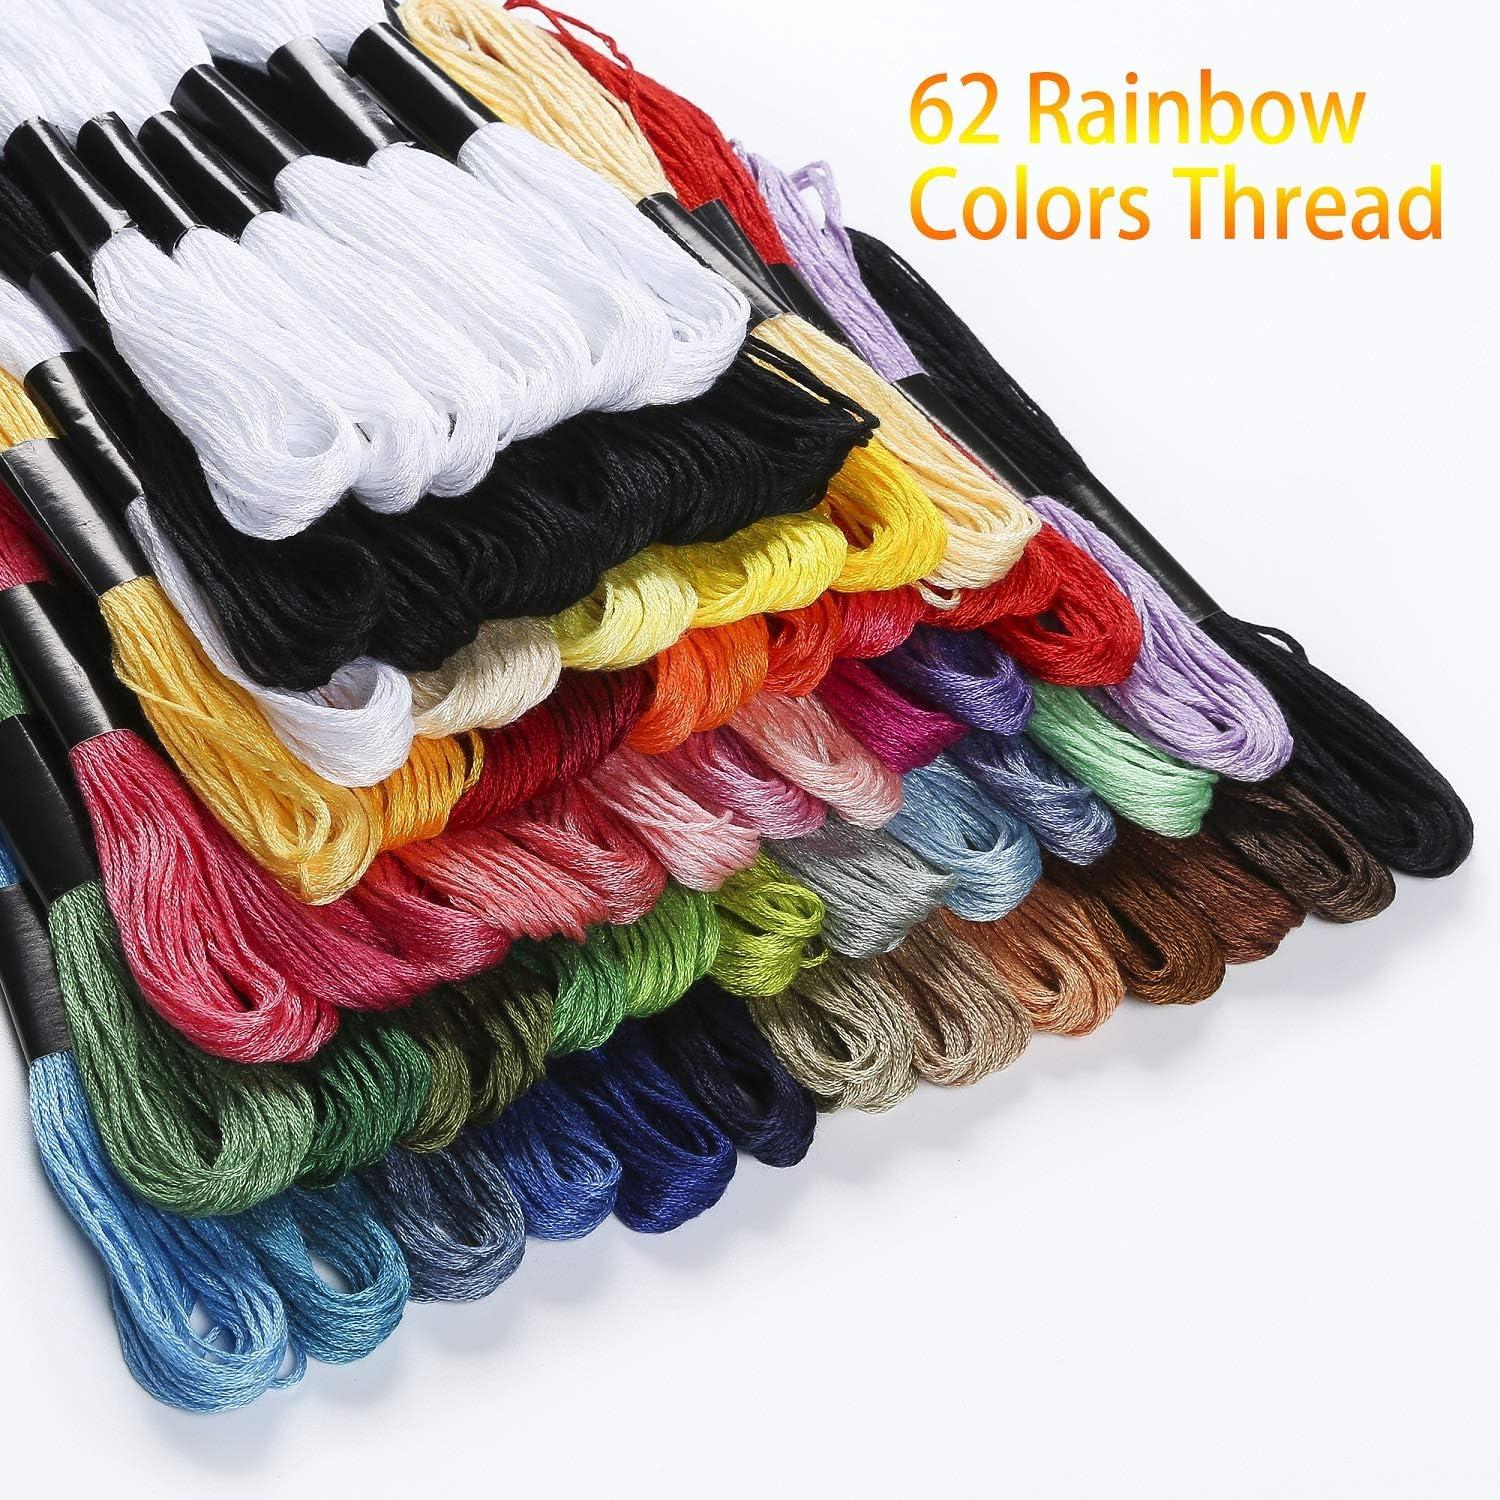 Black Embroidery Floss, 24 Skeins Embroidery Thread Friendship